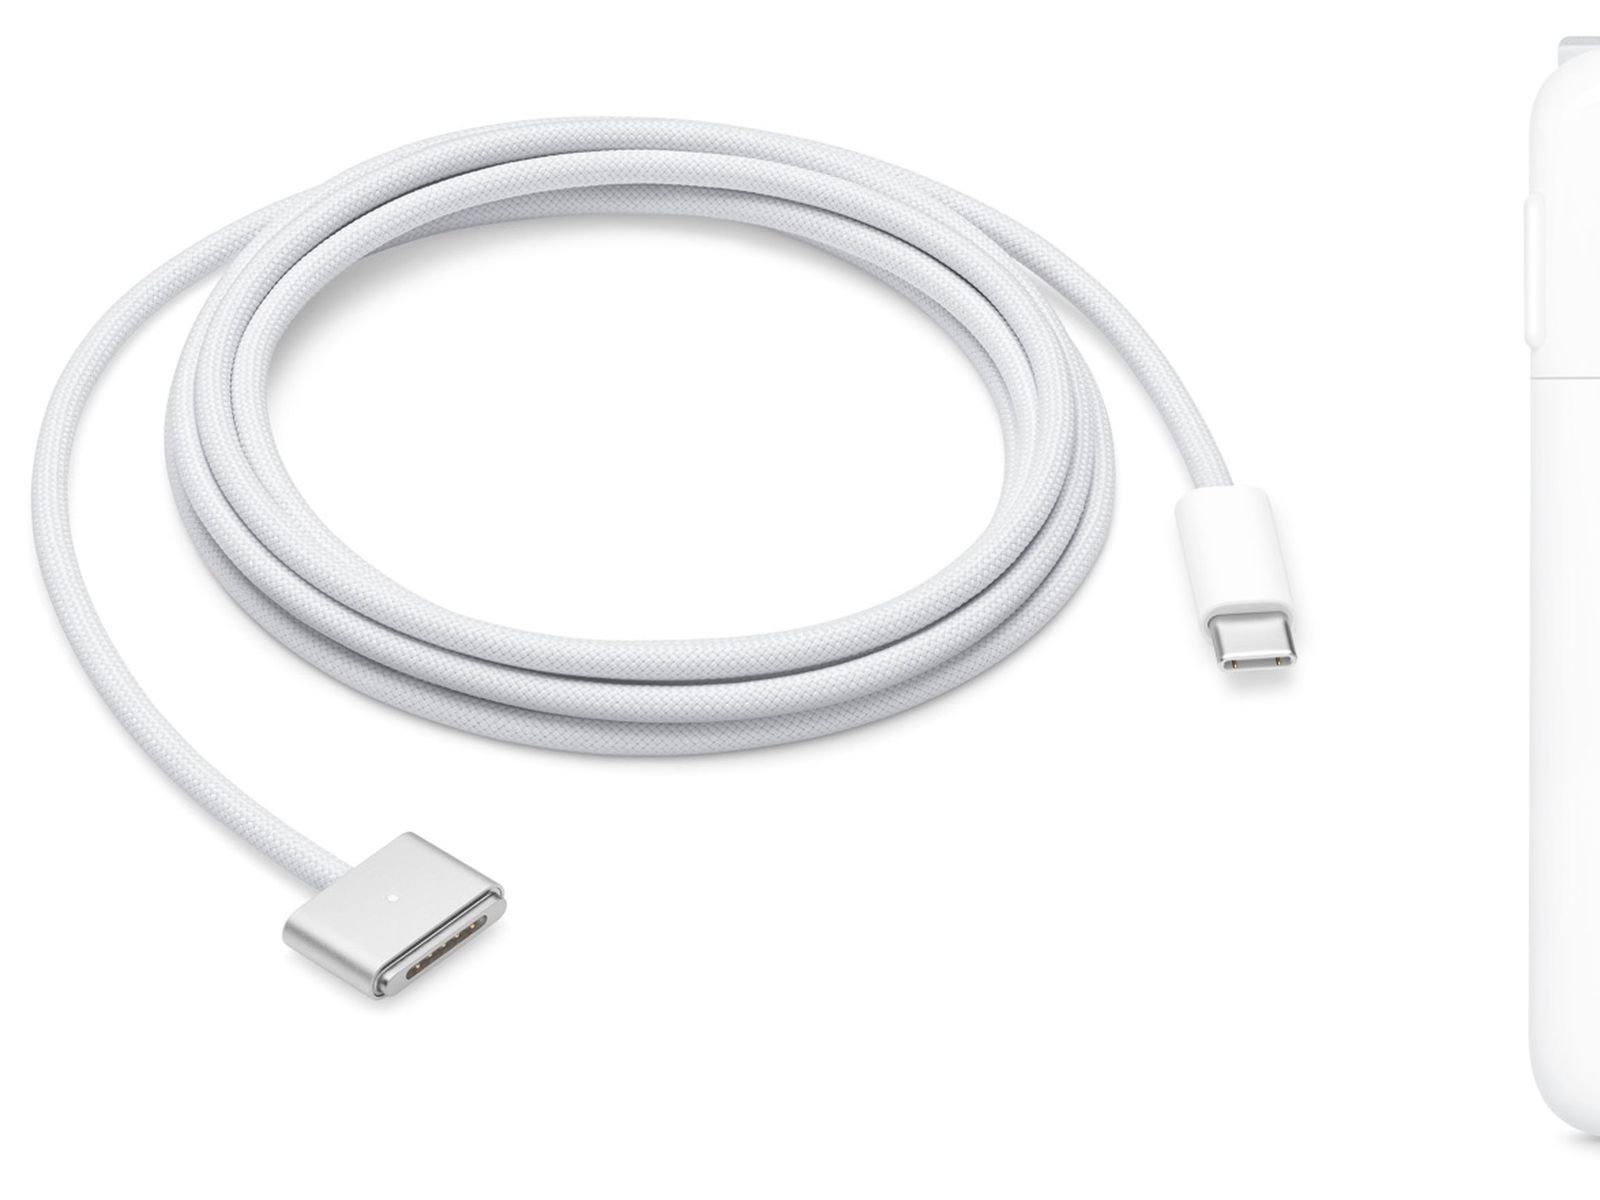 Apple Selling New $49 Braided MagSafe Cable and $99 140W Power